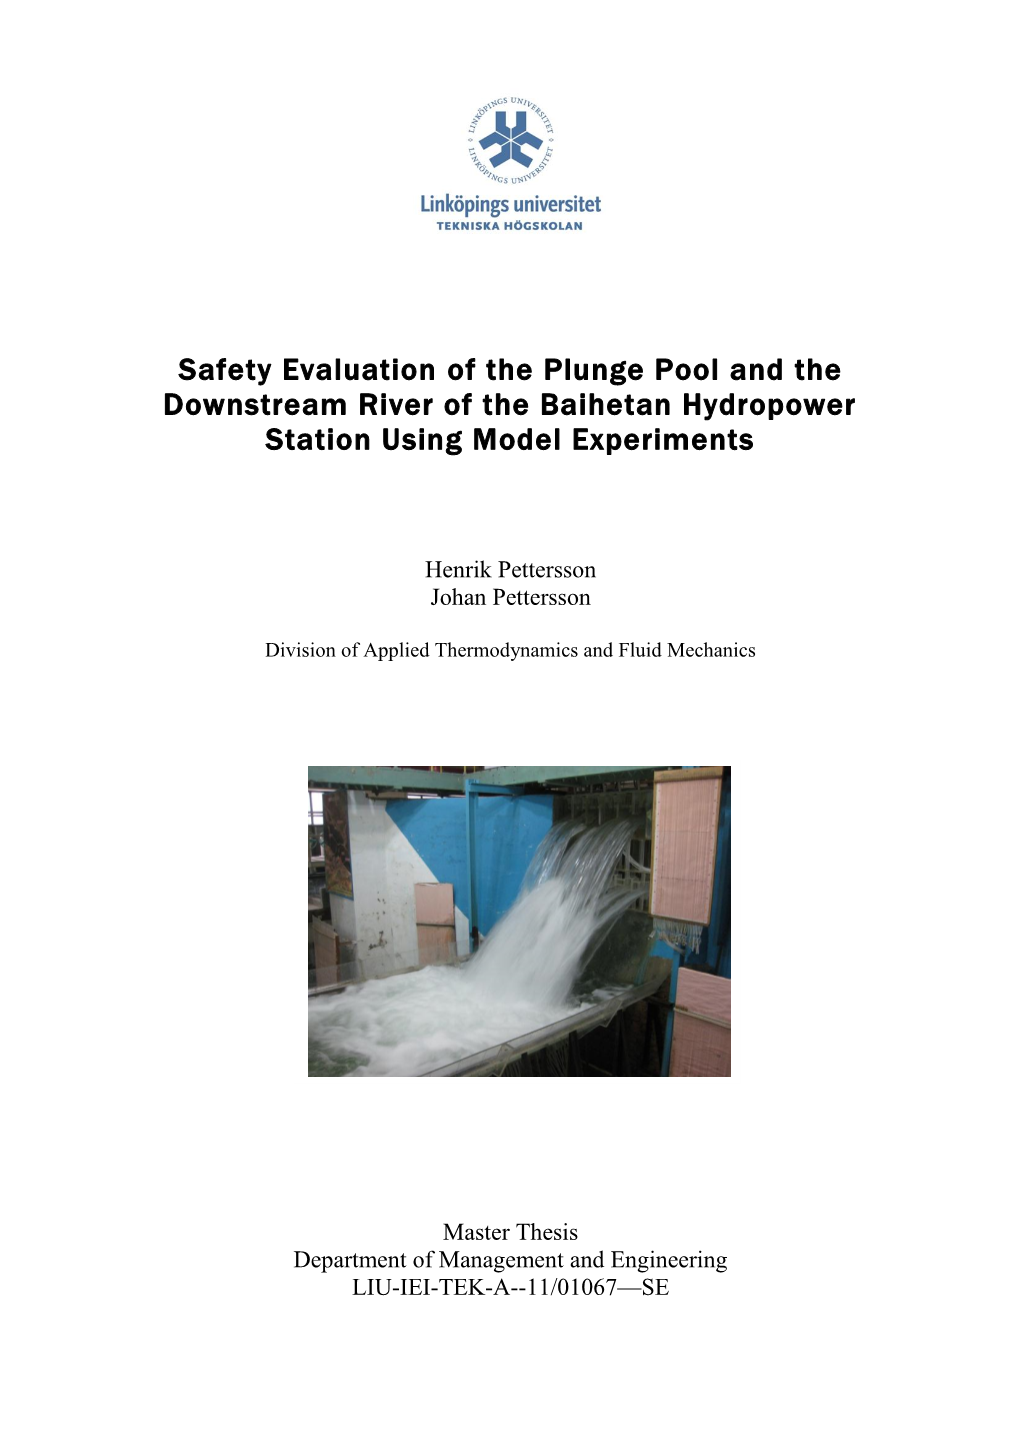 Safety Evaluation of the Plunge Pool and the Downstream River of the Baihetan Hydropower Station Using Model Experiments